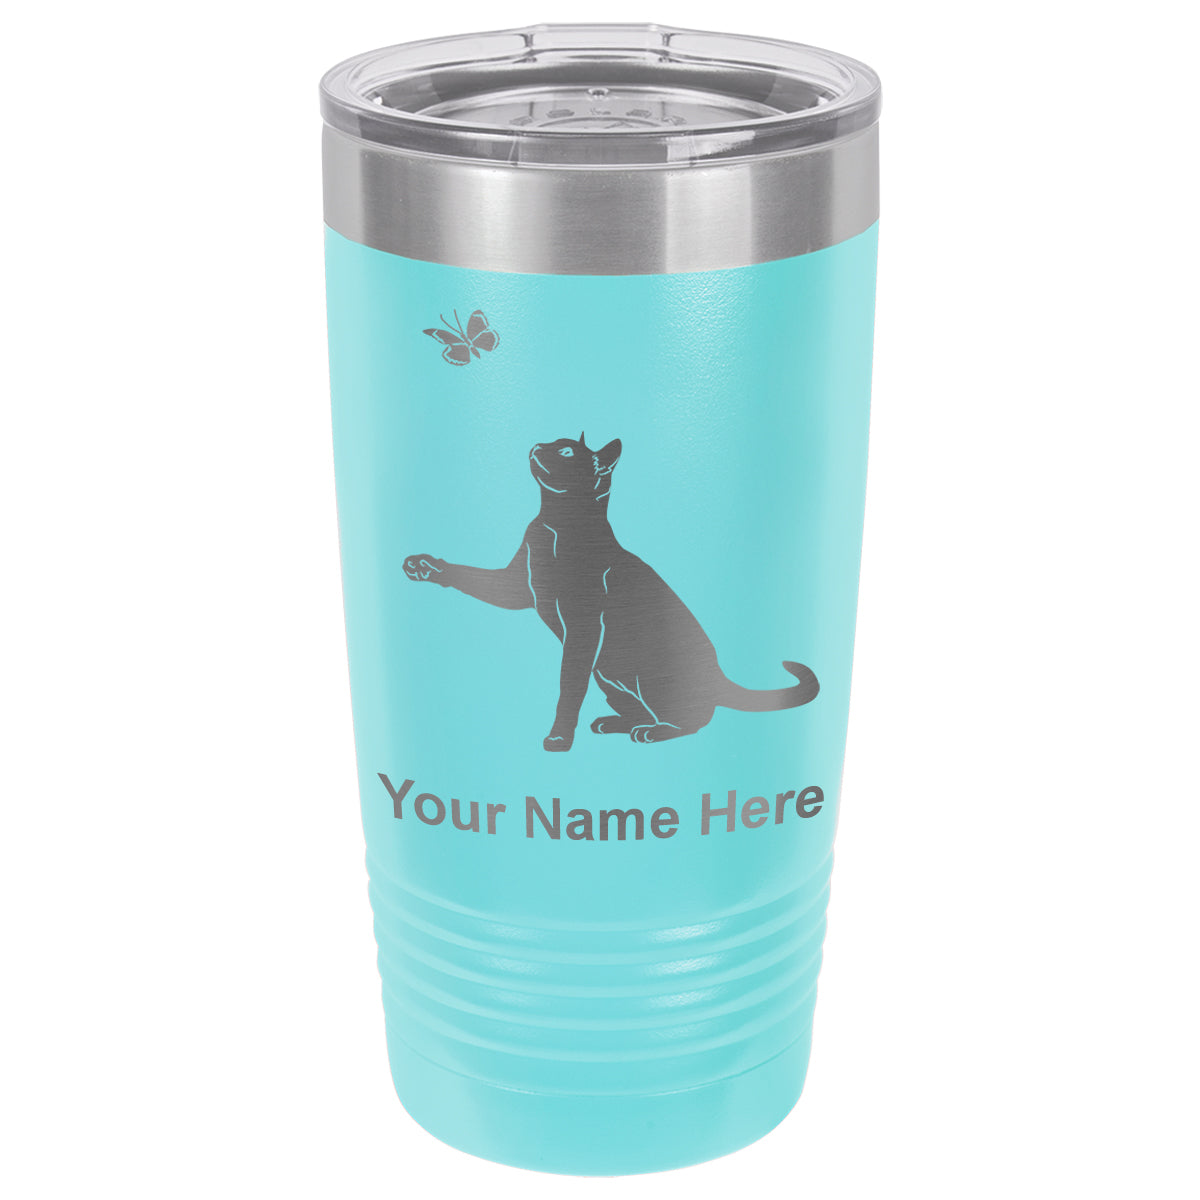 20oz Vacuum Insulated Tumbler Mug, Cat with Butterfly, Personalized Engraving Included